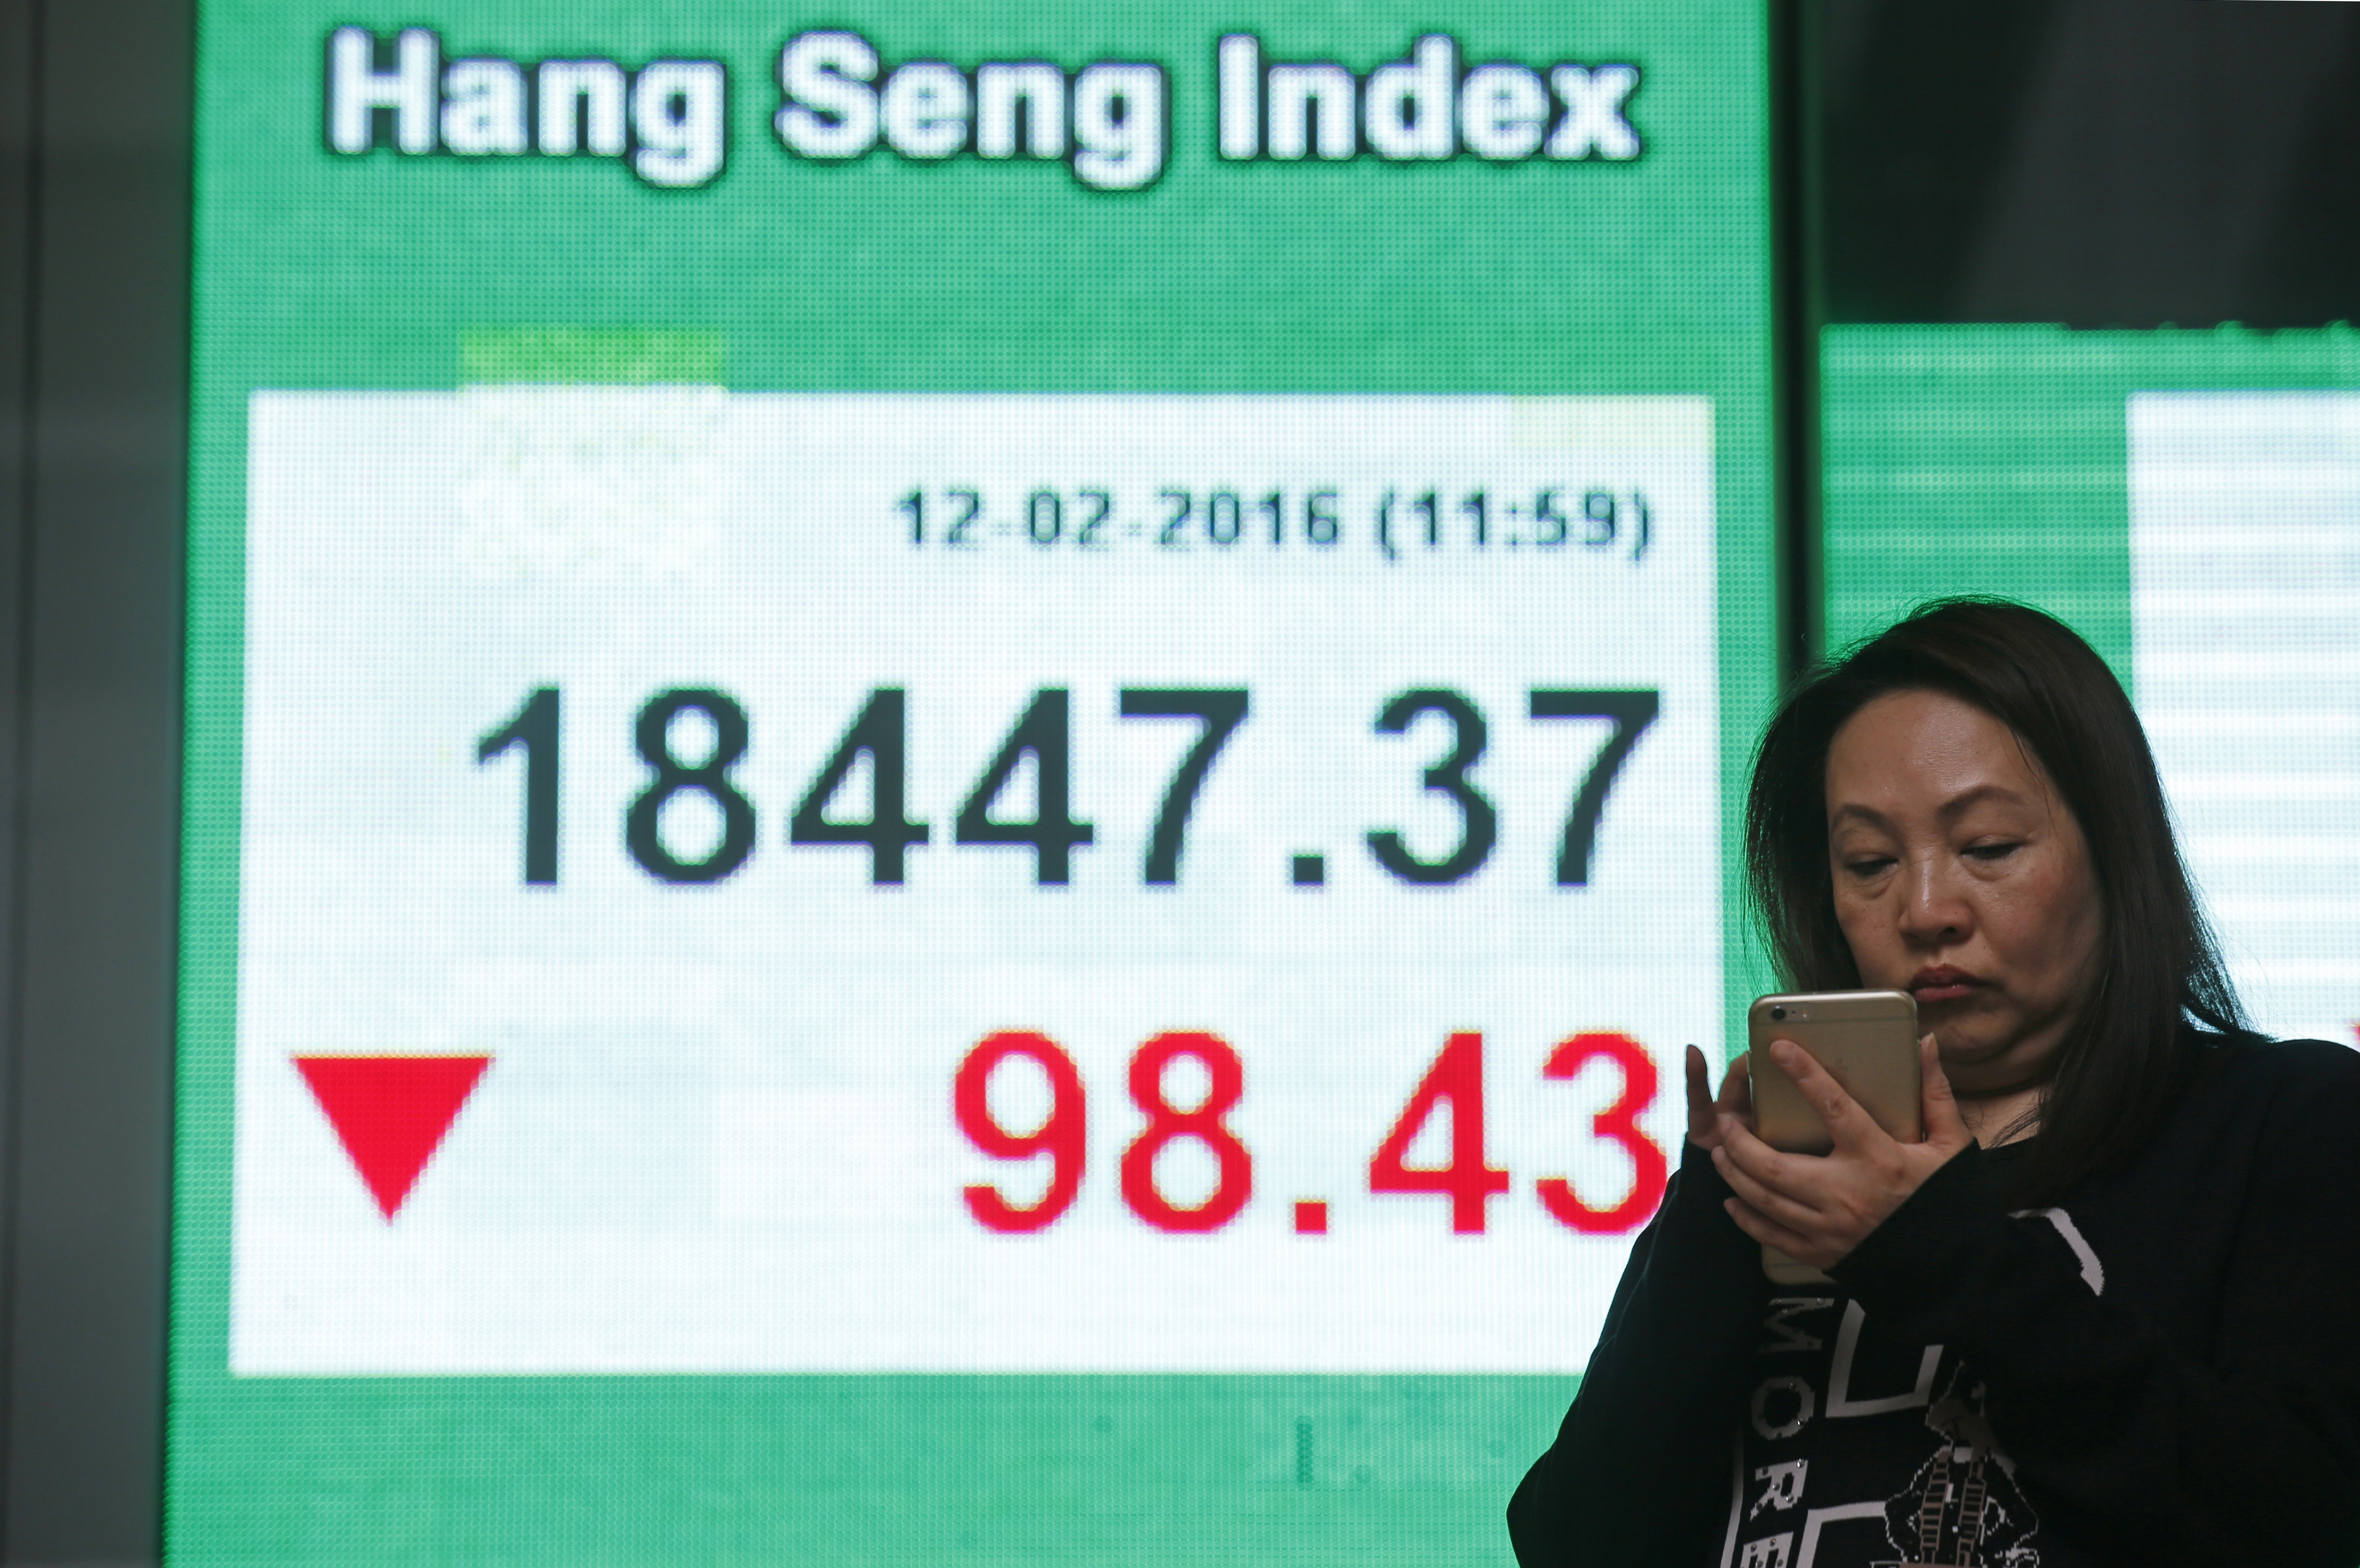 A woman uses her smartphone in front of an electronic board showing the Hong Kong index at a bank in Hong Kong, Friday, Feb. 12, 2016. Japan’s main stock index dived Friday, leading other Asian markets lower, after a sell-off in banking shares roiled investors in the U.S. and Europe. (AP Photo/Kin Cheung)